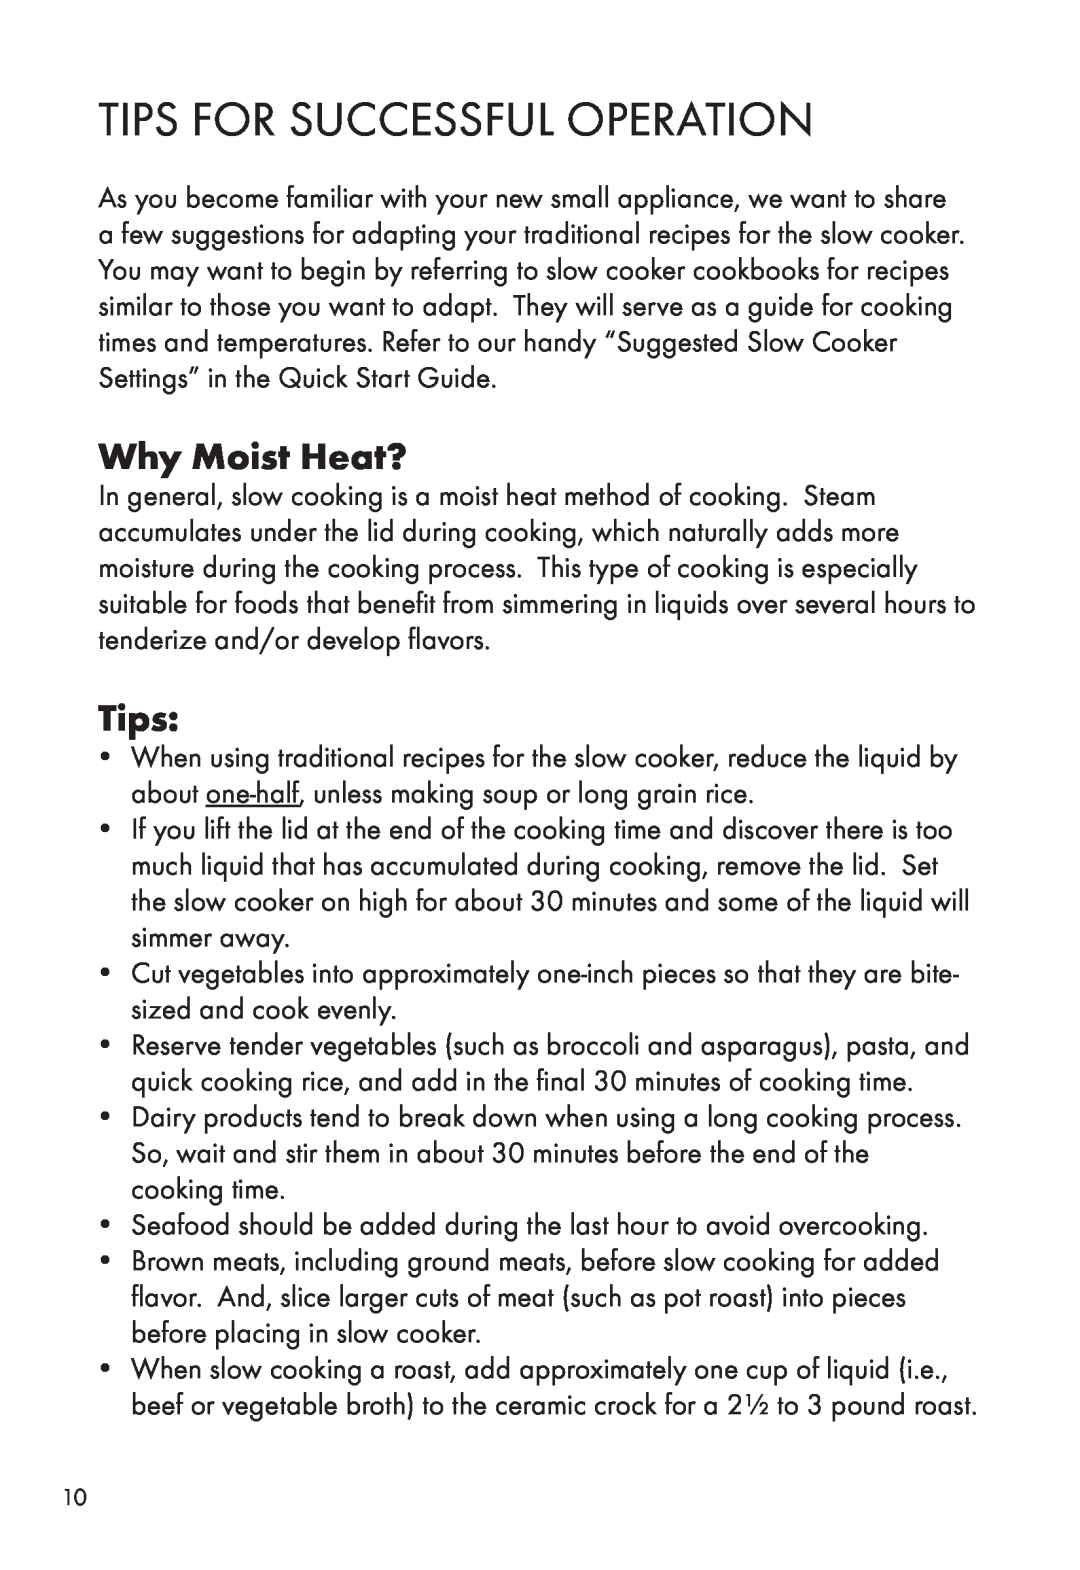 Calphalon HE400SC manual Tips For Successful Operation, Why Moist Heat? 